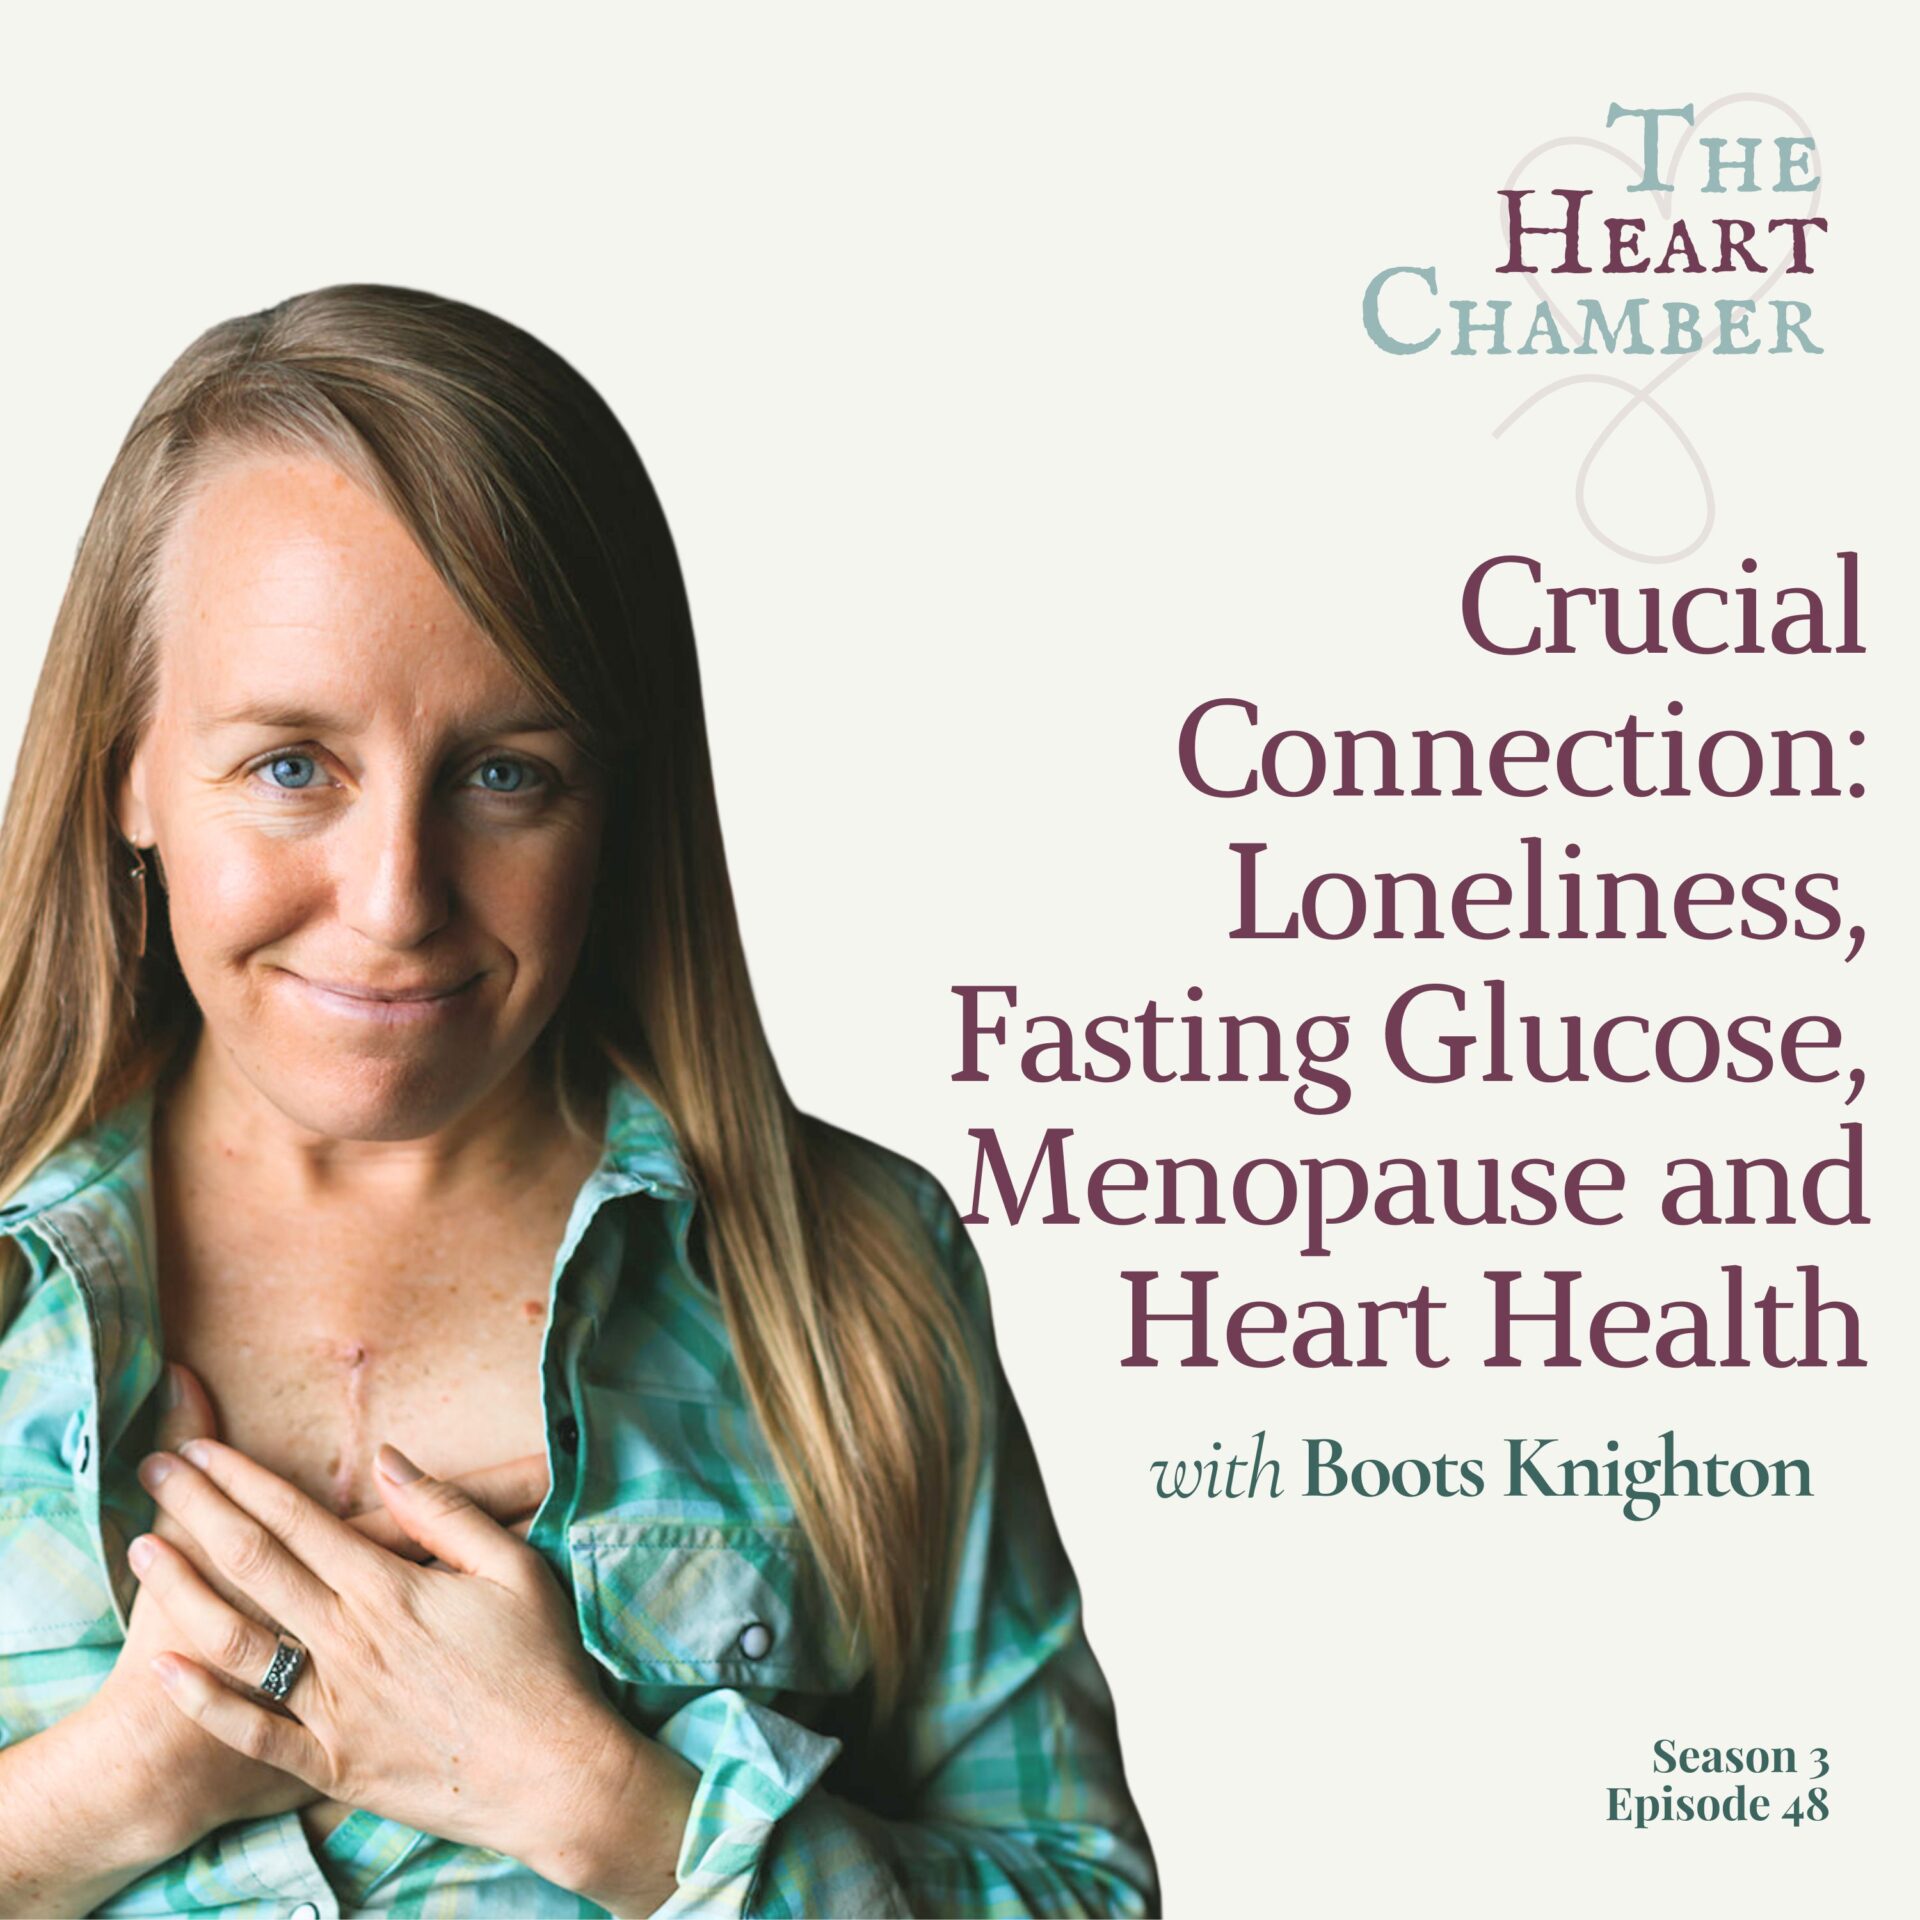 Crucial Connection: Loneliness, Fasting Glucose, Menopause and Heart Health